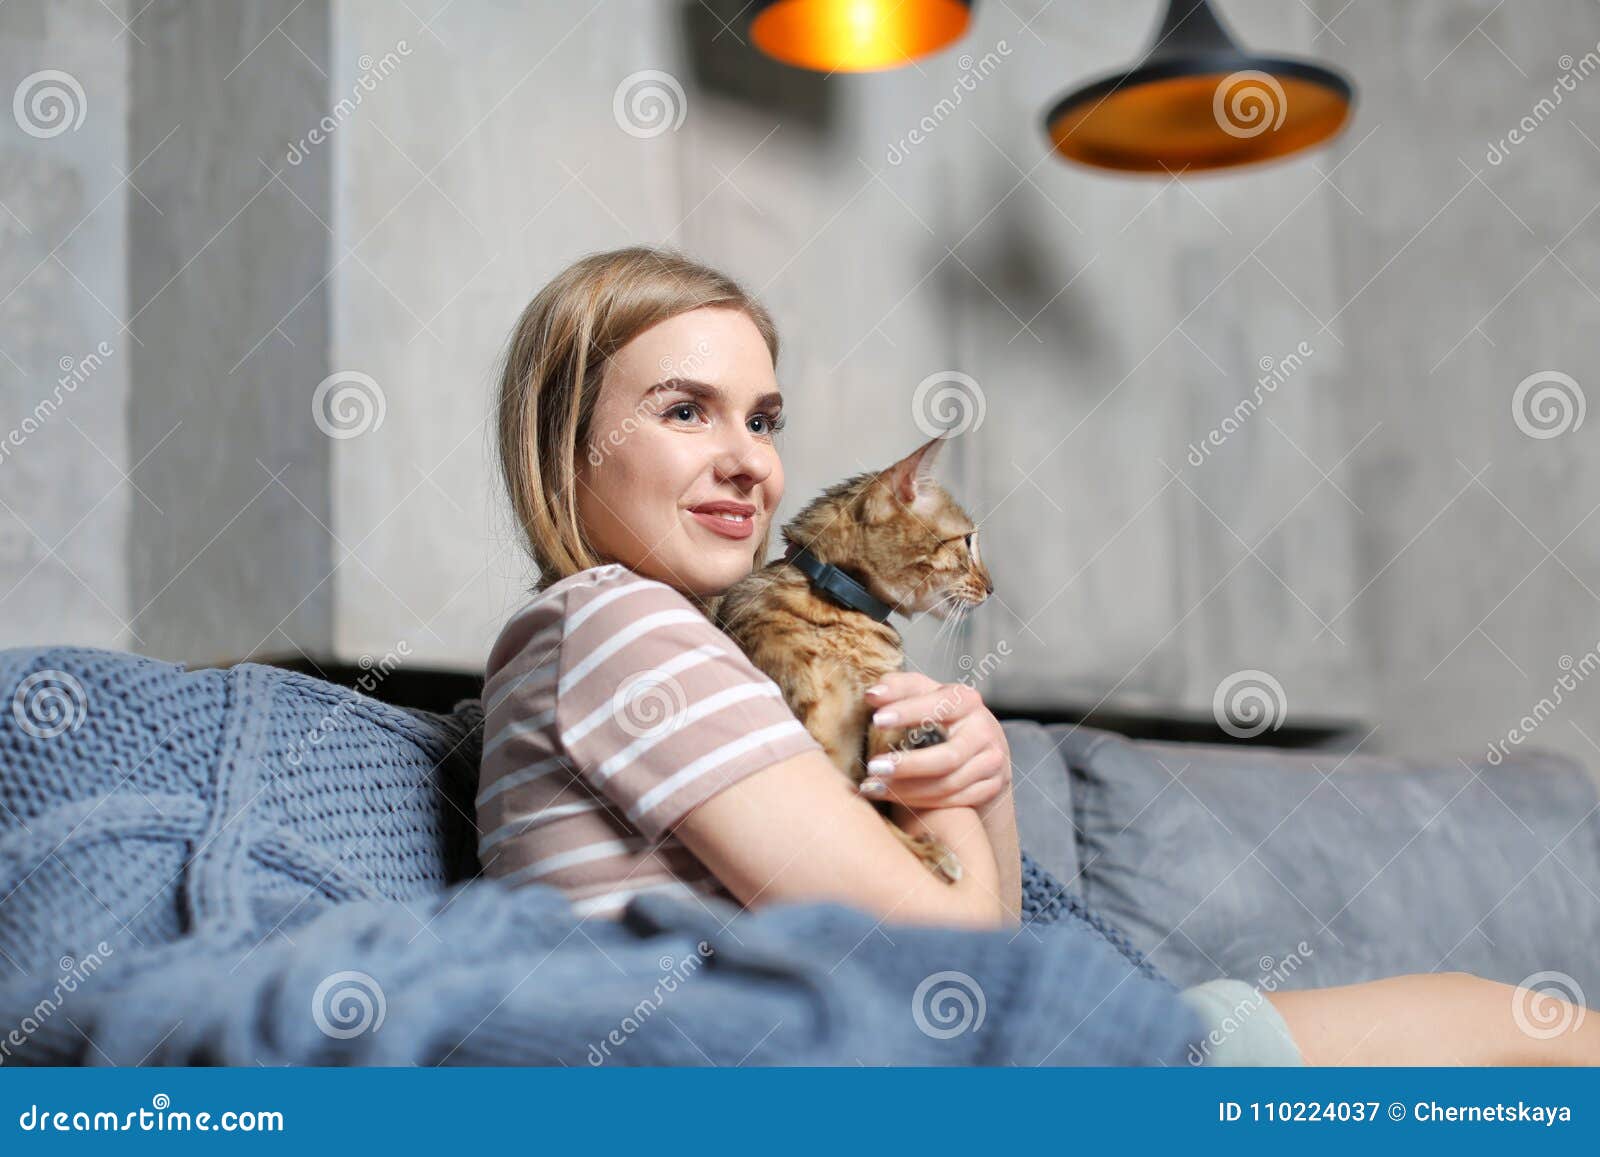 Beautiful Young Woman with Cute Cat on Sofa Stock Image - Image of ...